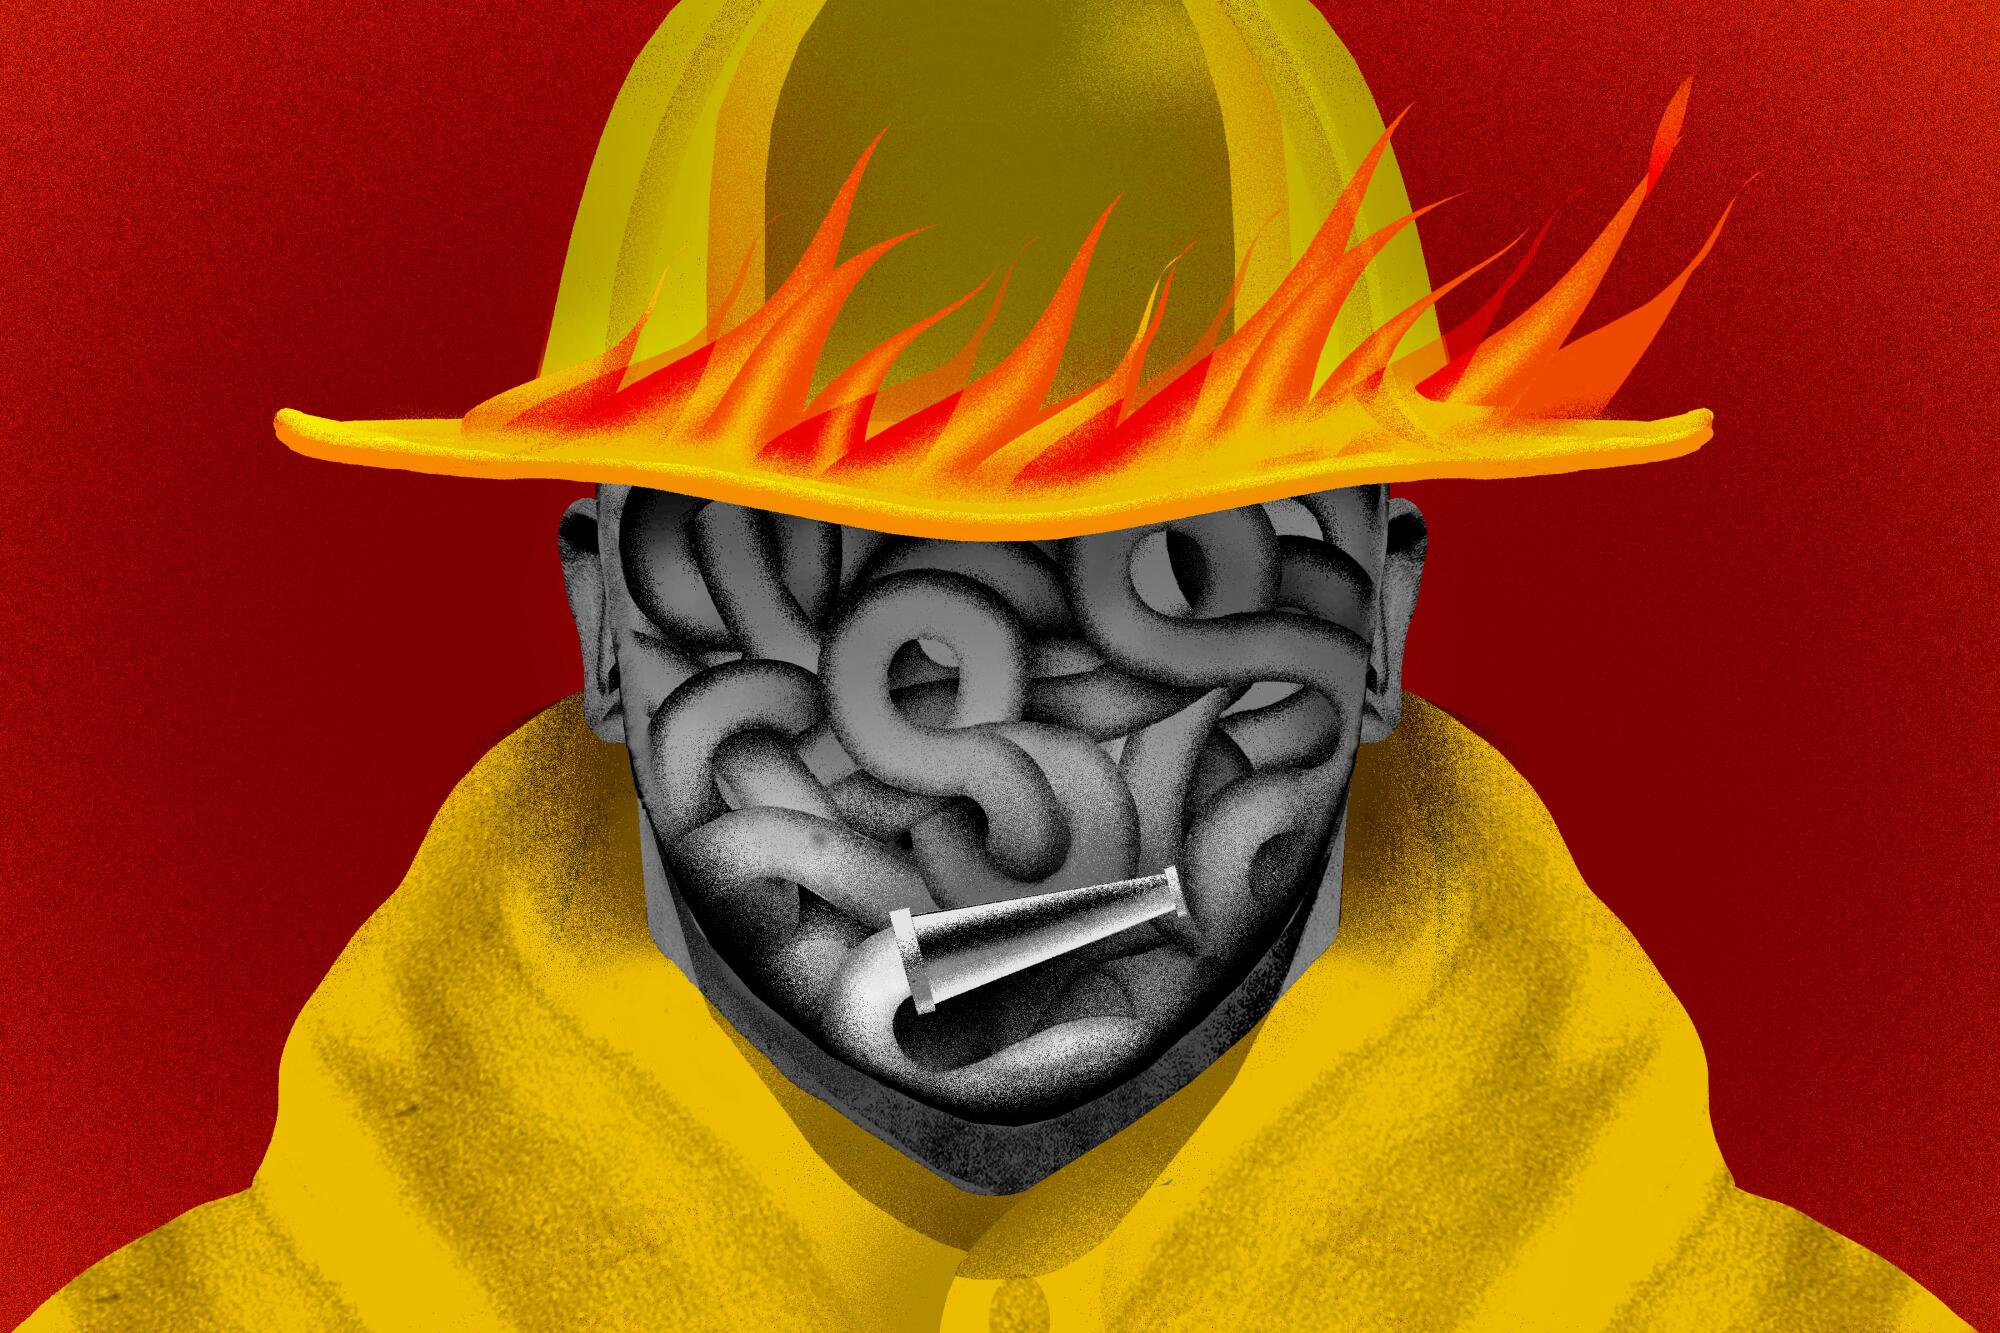 An illustration of a firefighter with a tangled hose for a face and his hat ablaze